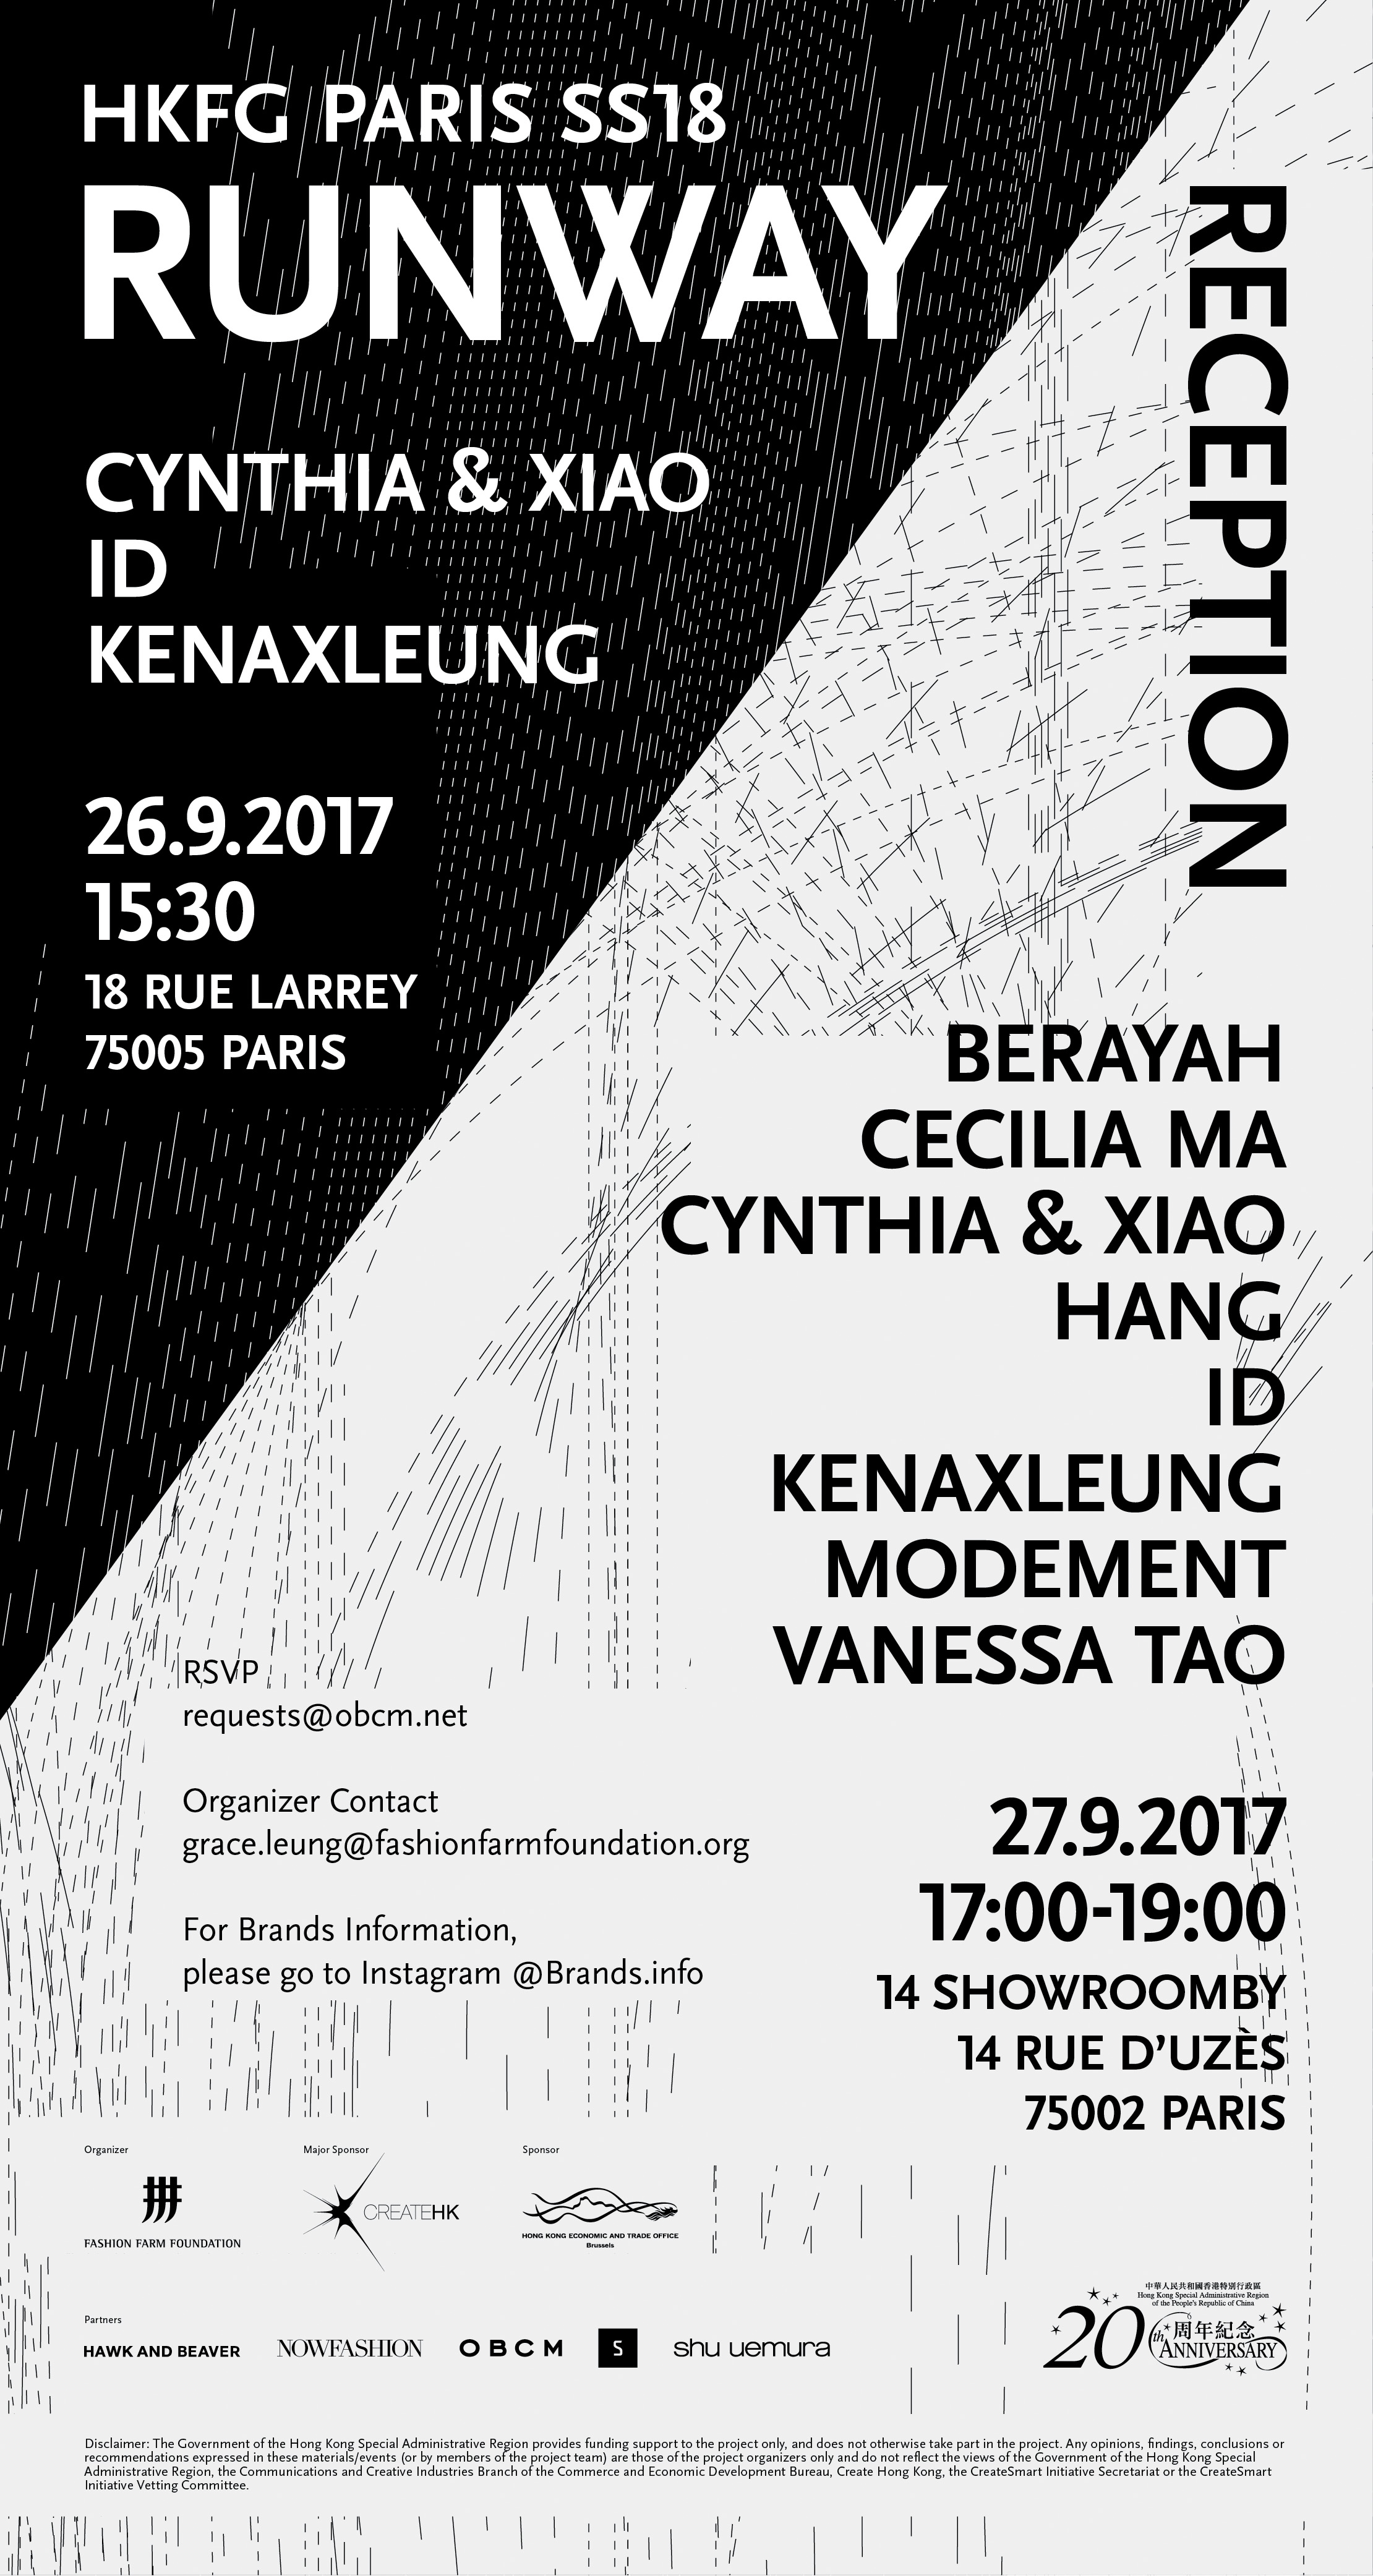 Supporting Event - HKFG Paris SS18